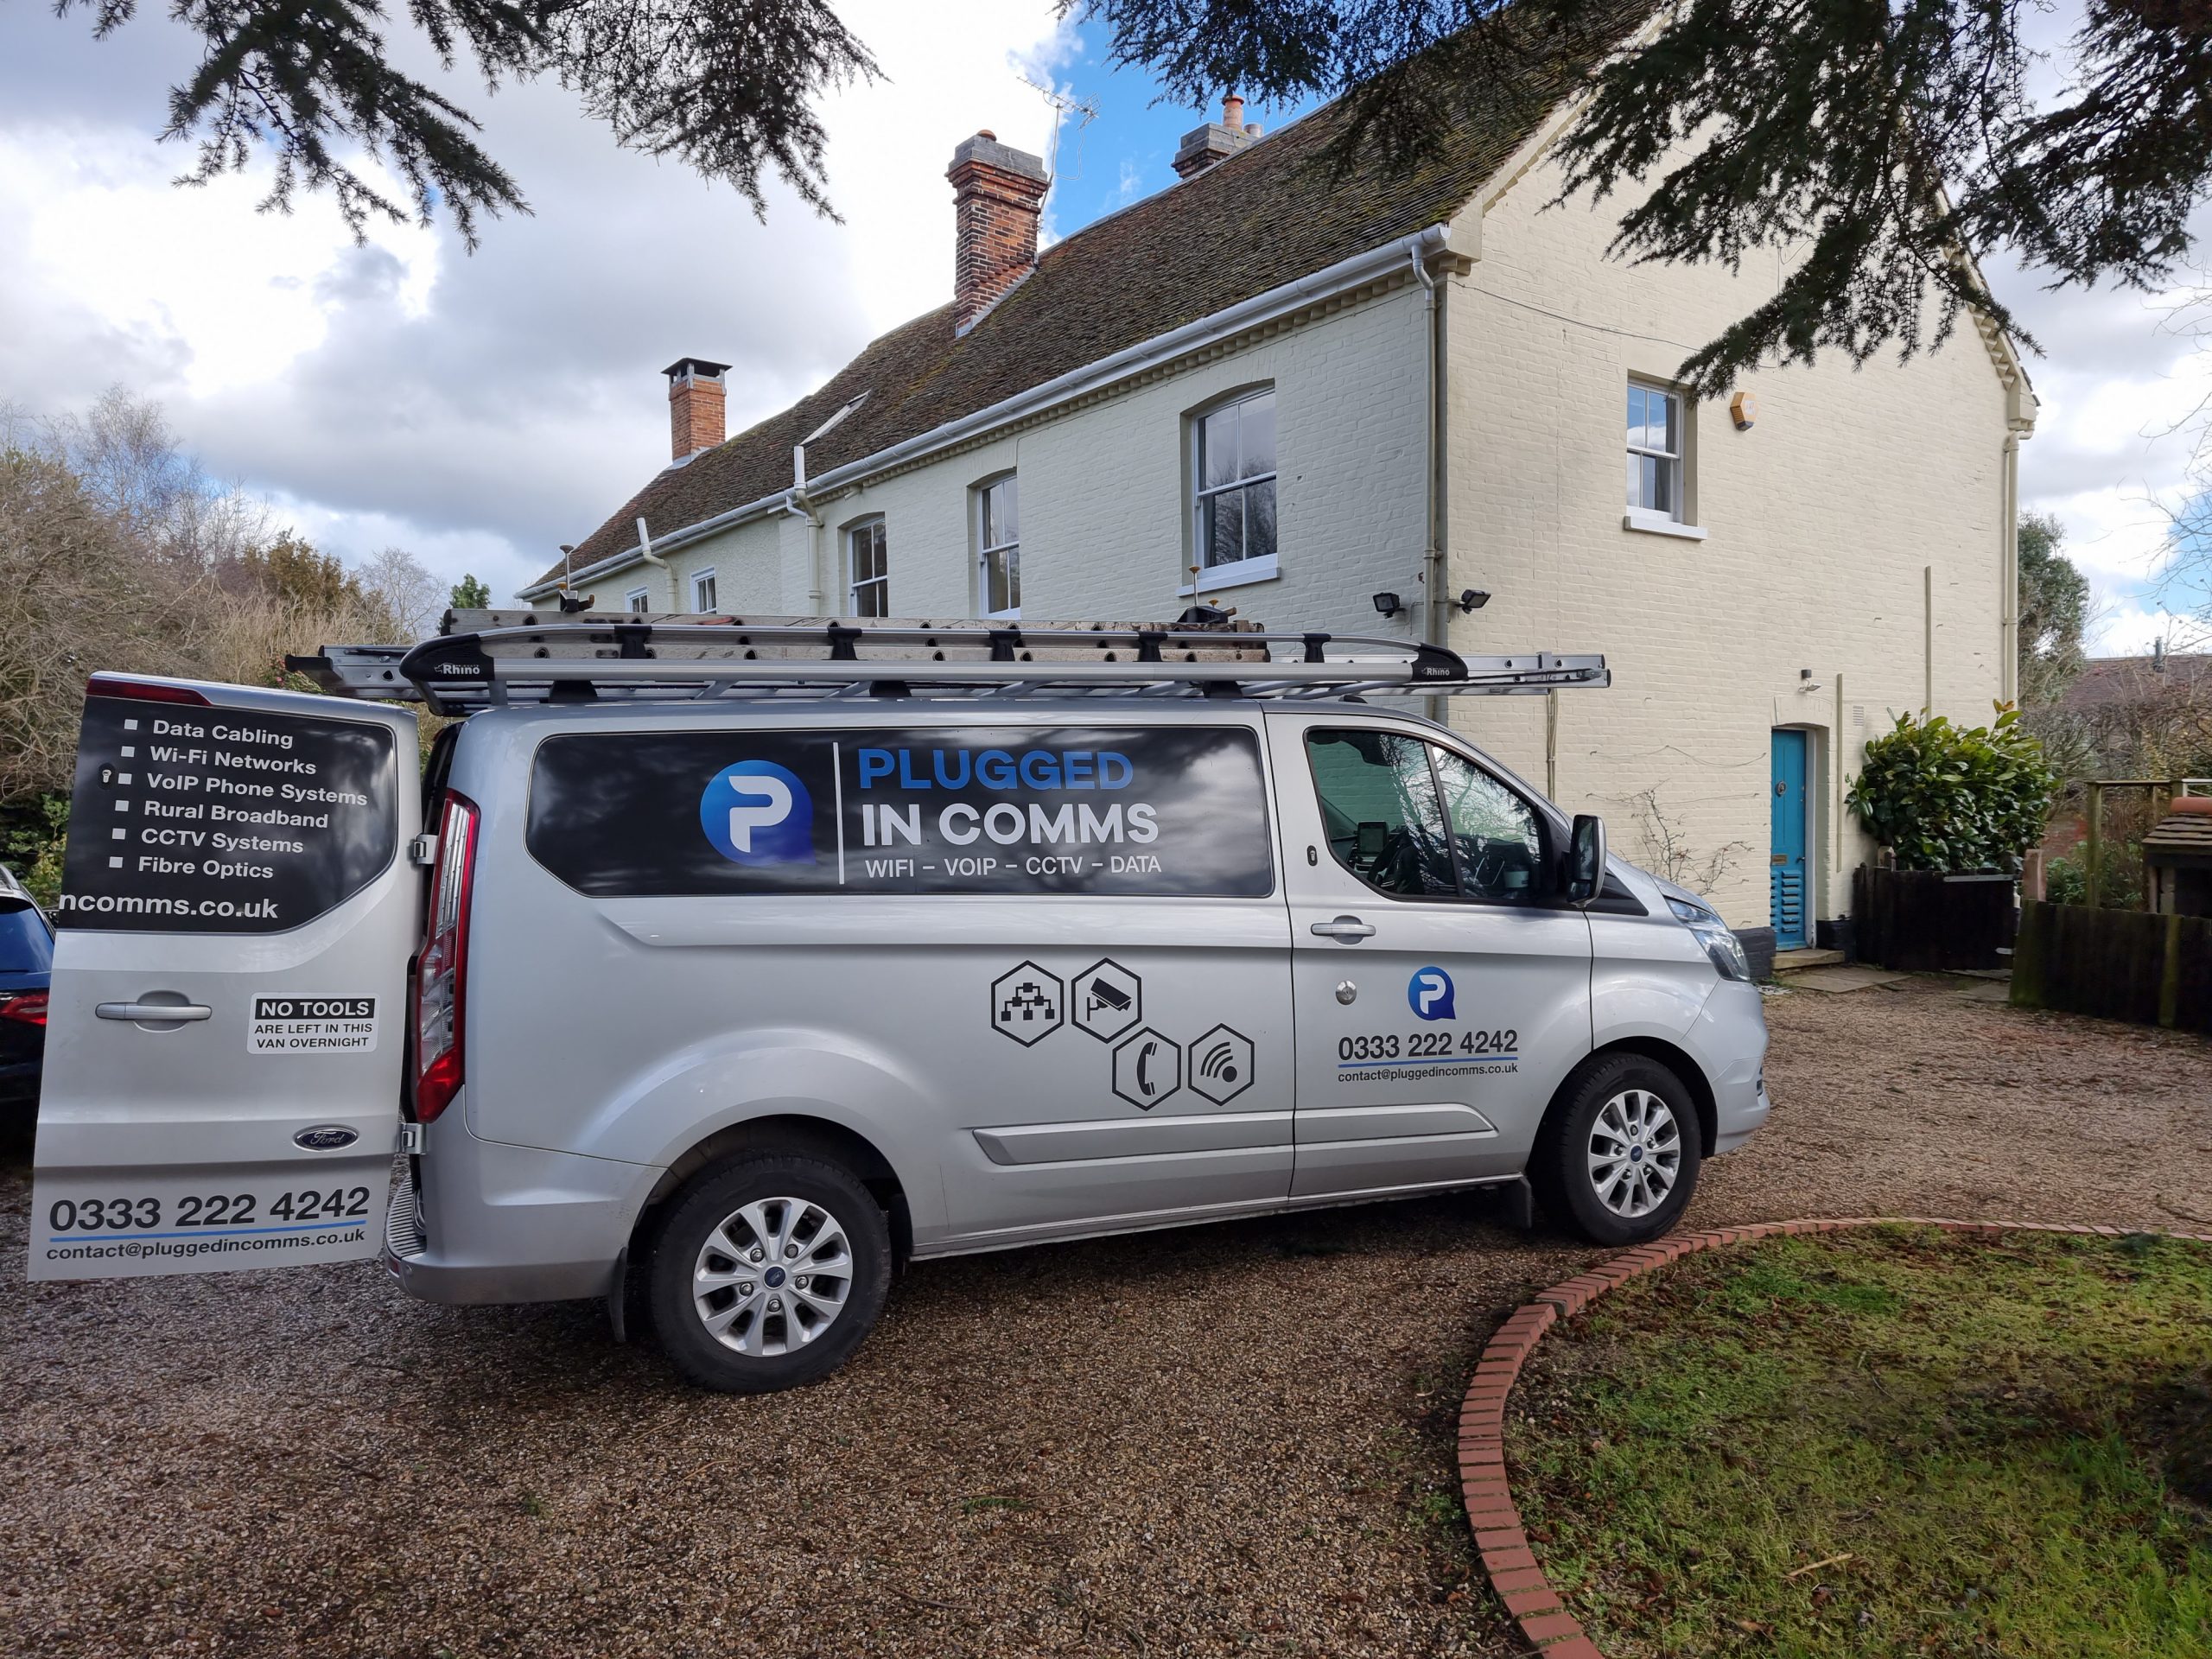 Plugged-in comms van actively working in a rural area, ensuring reliable connectivity and communication solutions for remote locations.